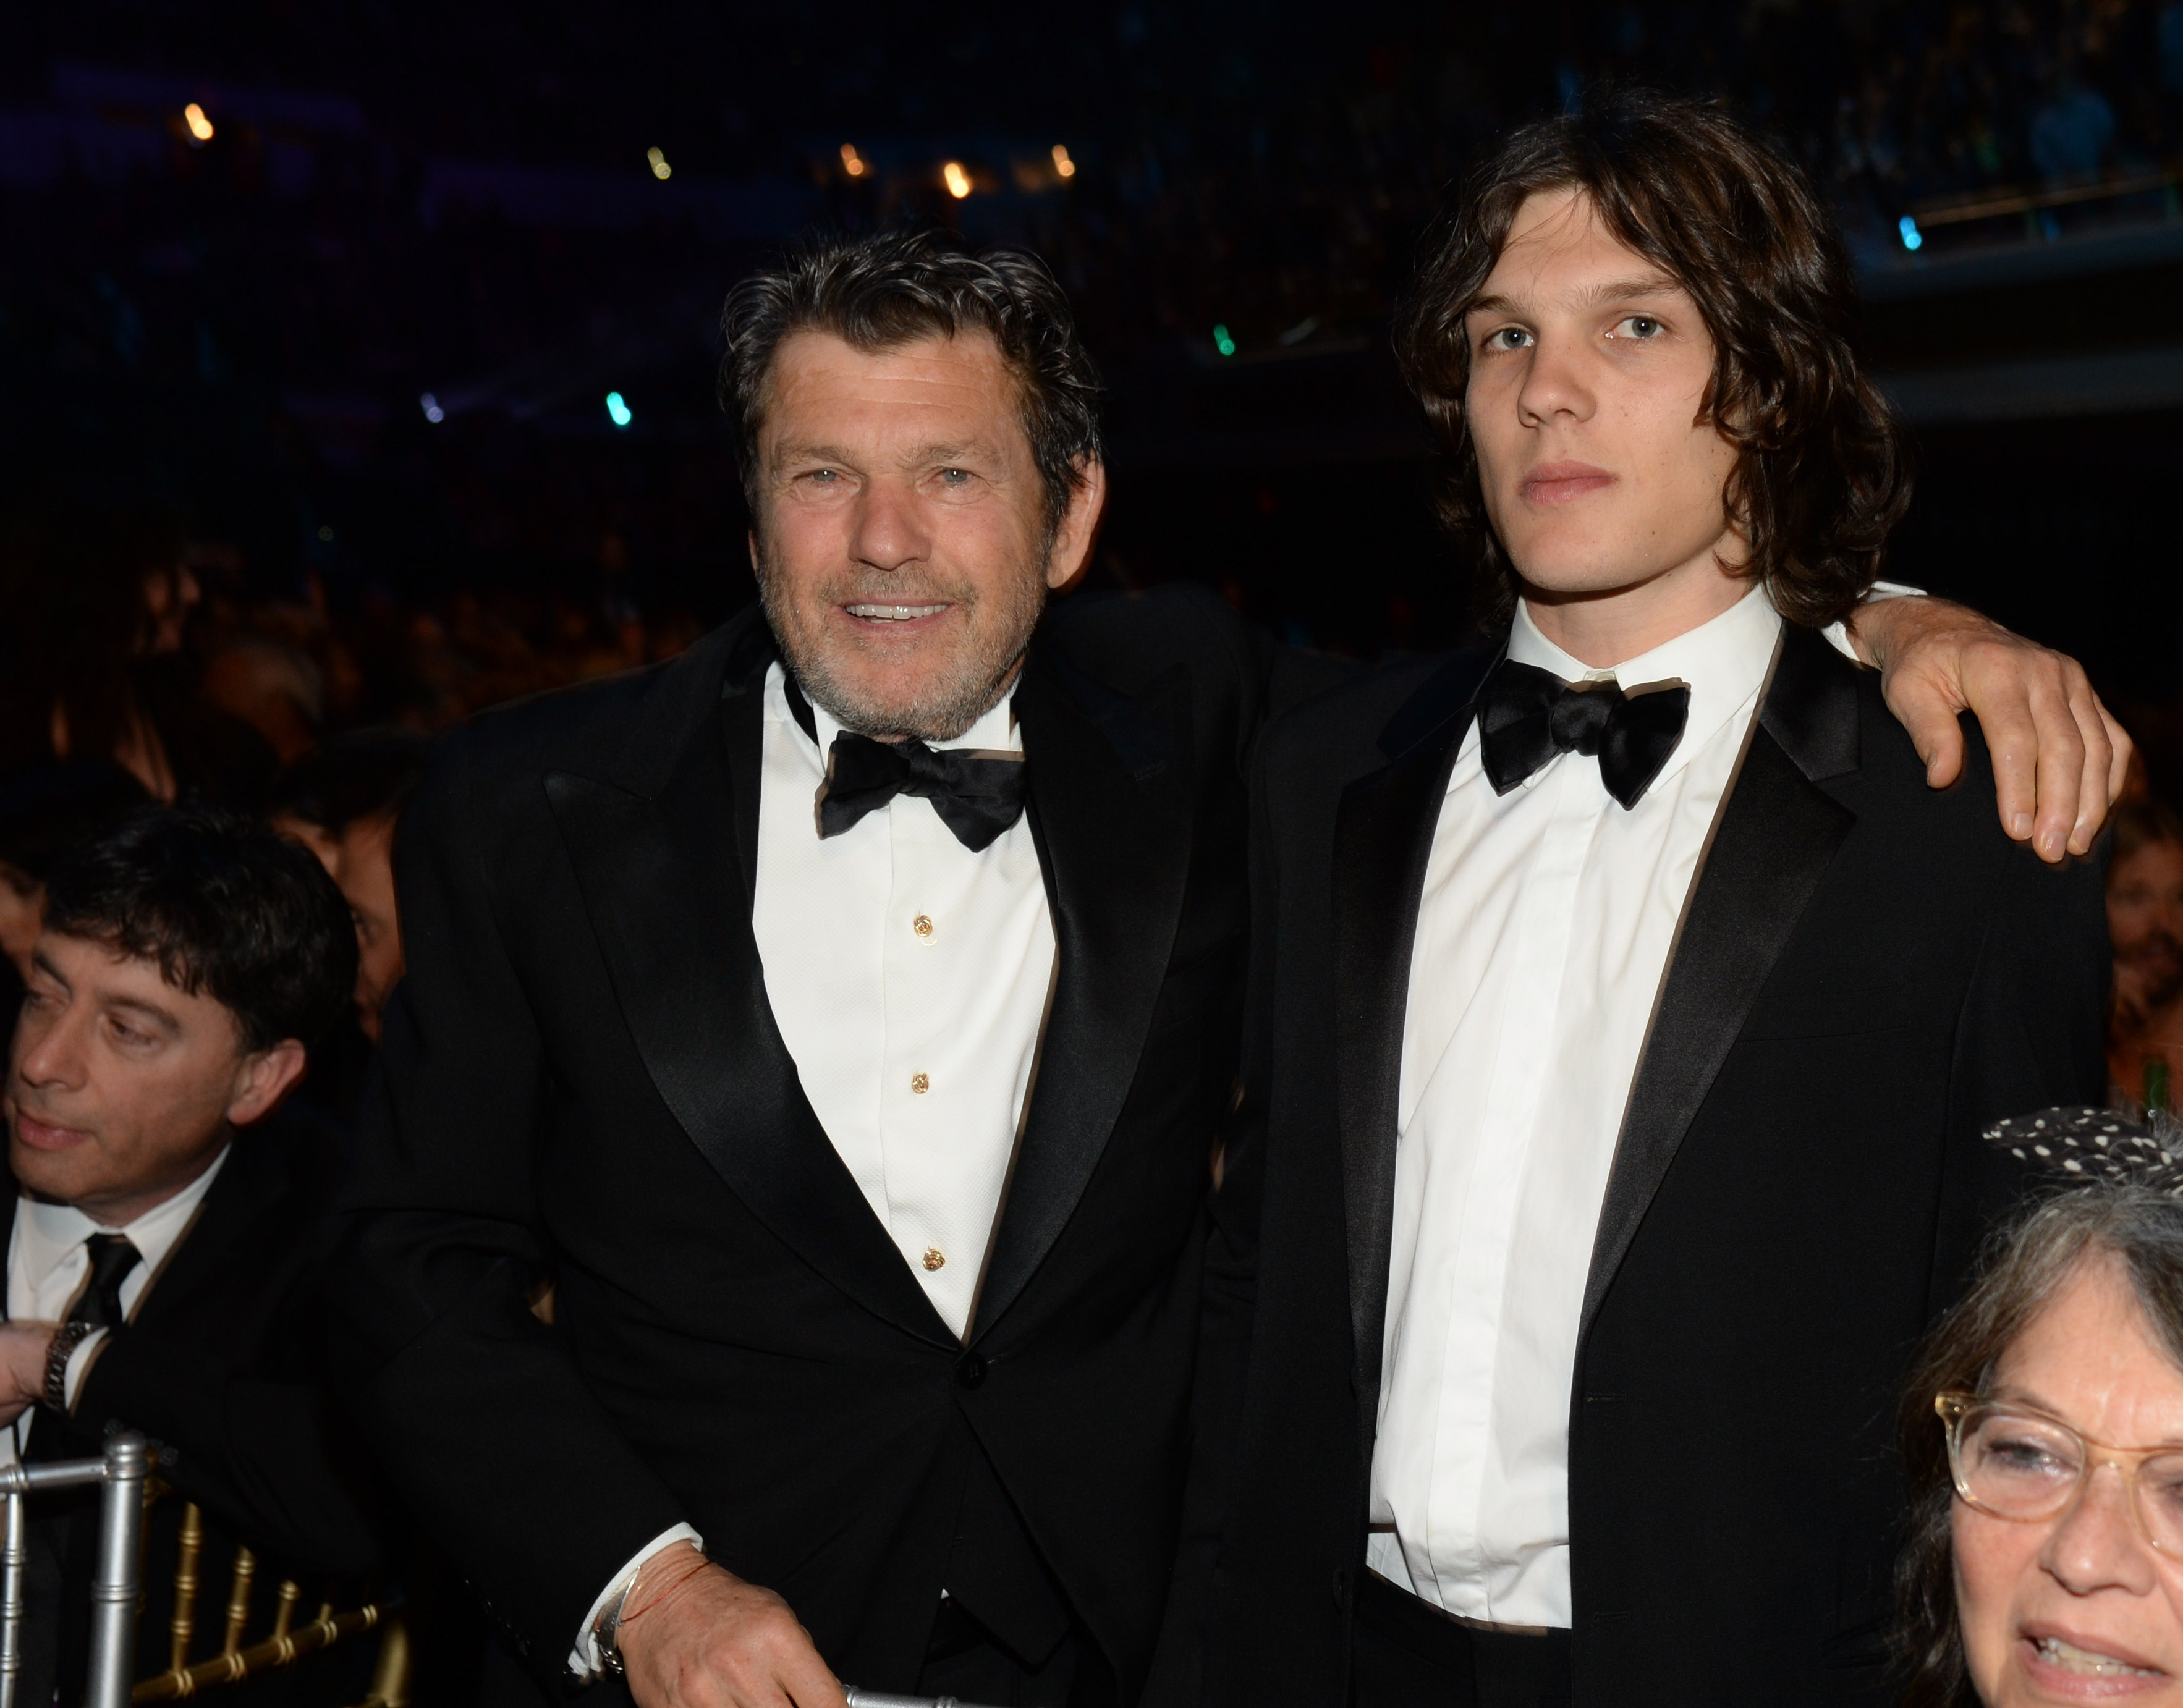 Jann Wenner and Theo Wenner at Public Hall on April 18, 2015, in Cleveland, Ohio. | Source: Getty Images